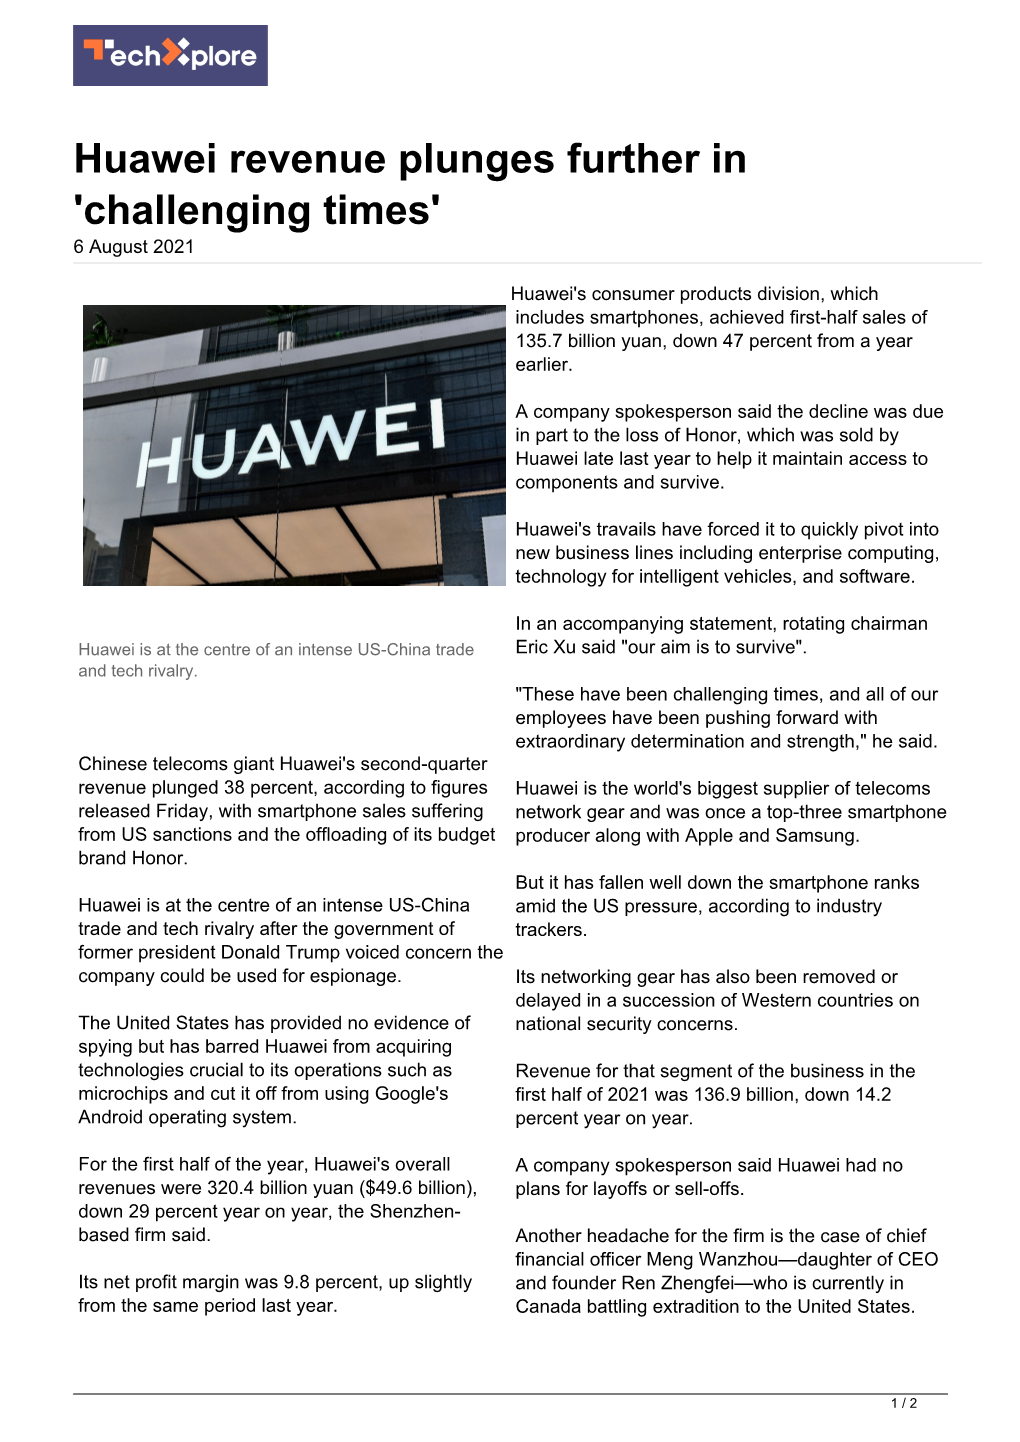 Huawei Revenue Plunges Further in 'Challenging Times' 6 August 2021